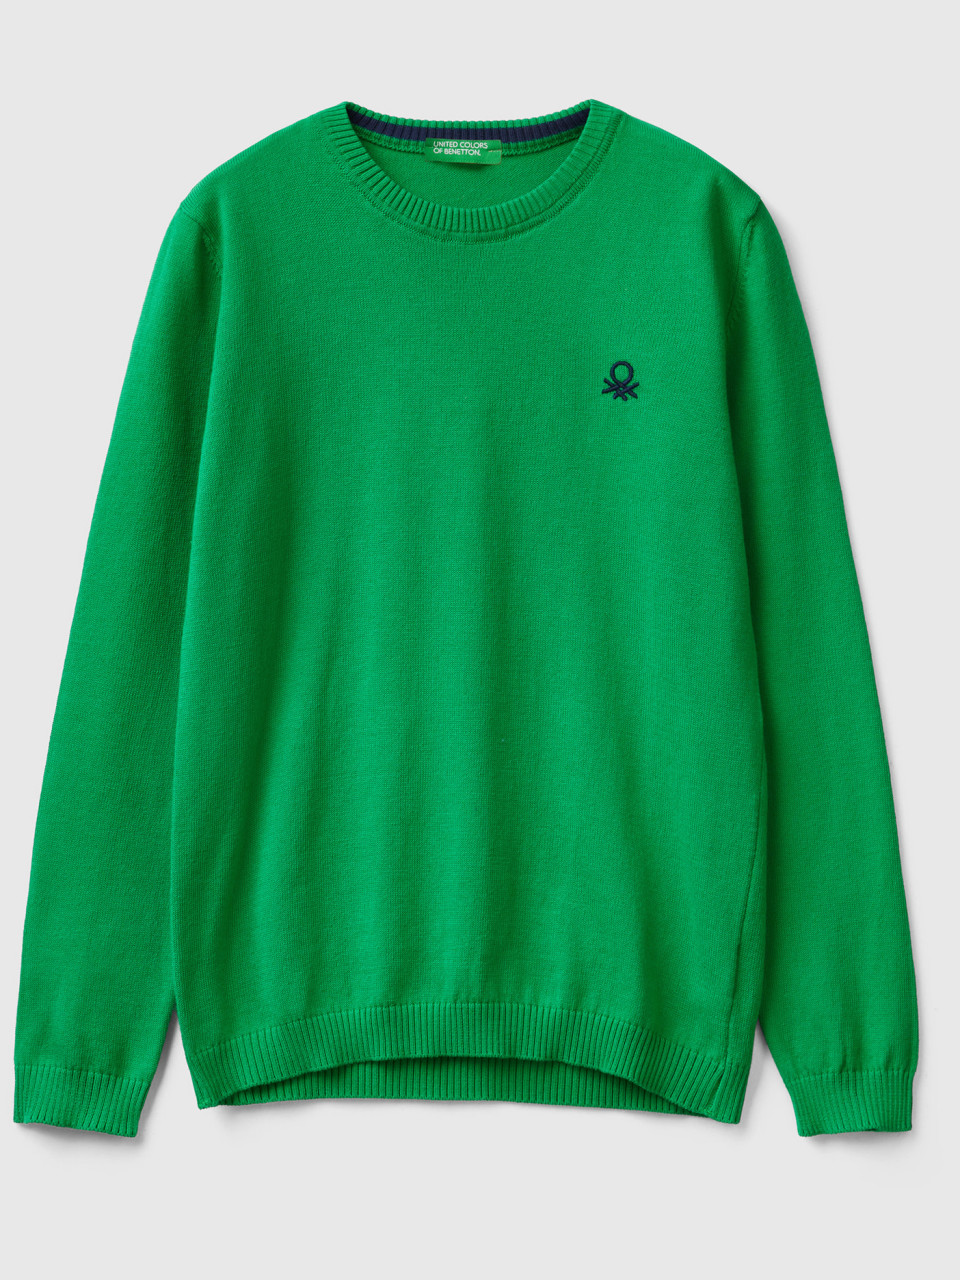 Benetton, Sweater In Pure Cotton With Logo, Green, Kids